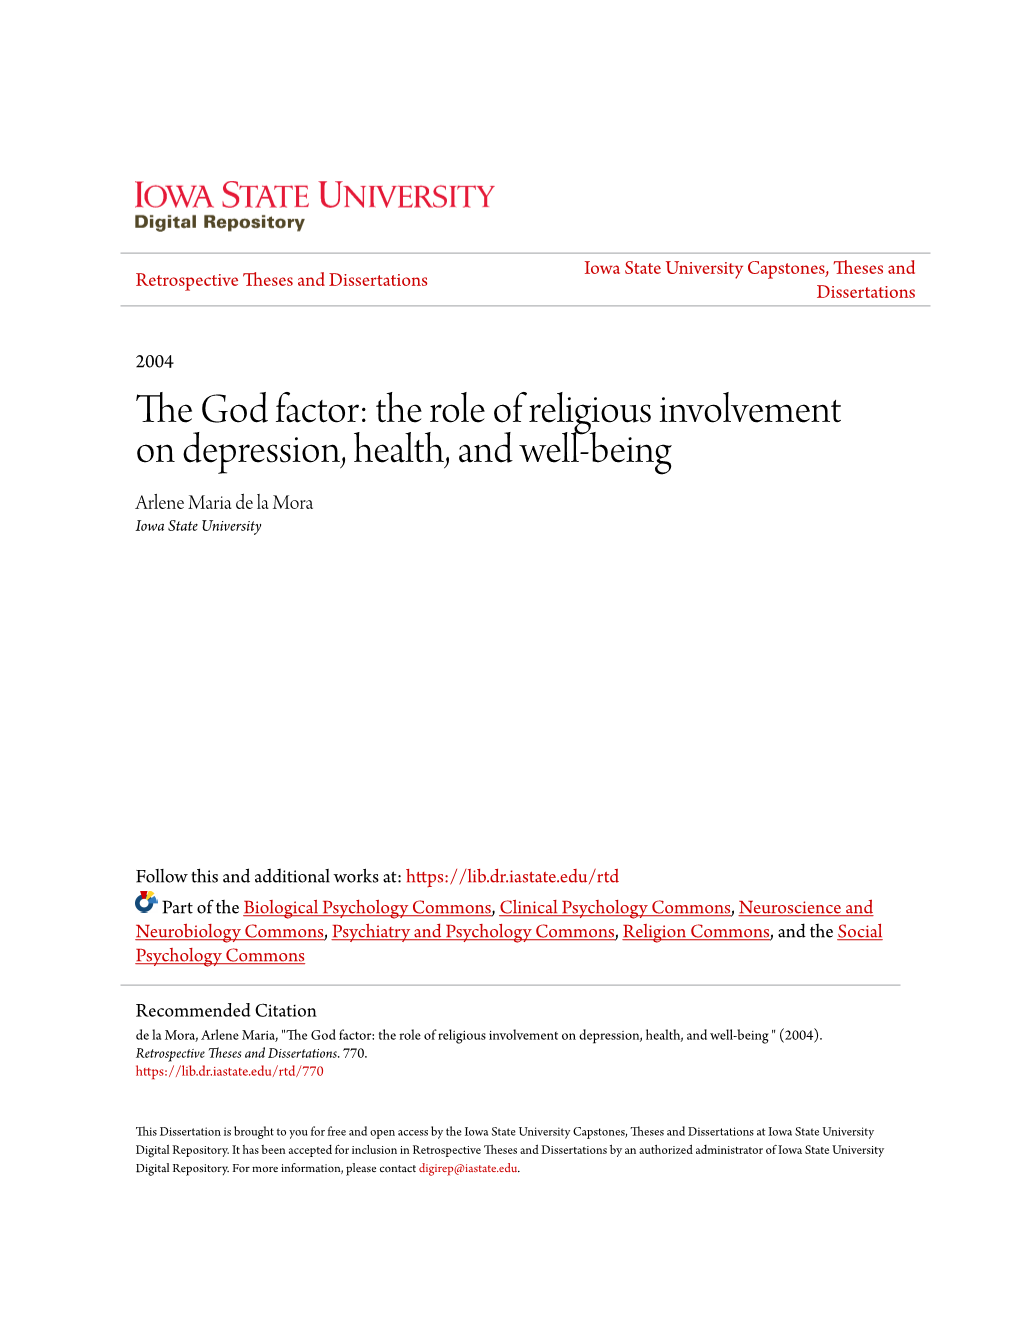 The Role of Religious Involvement on Depression, Health, and Well-Being Arlene Maria De La Mora Iowa State University